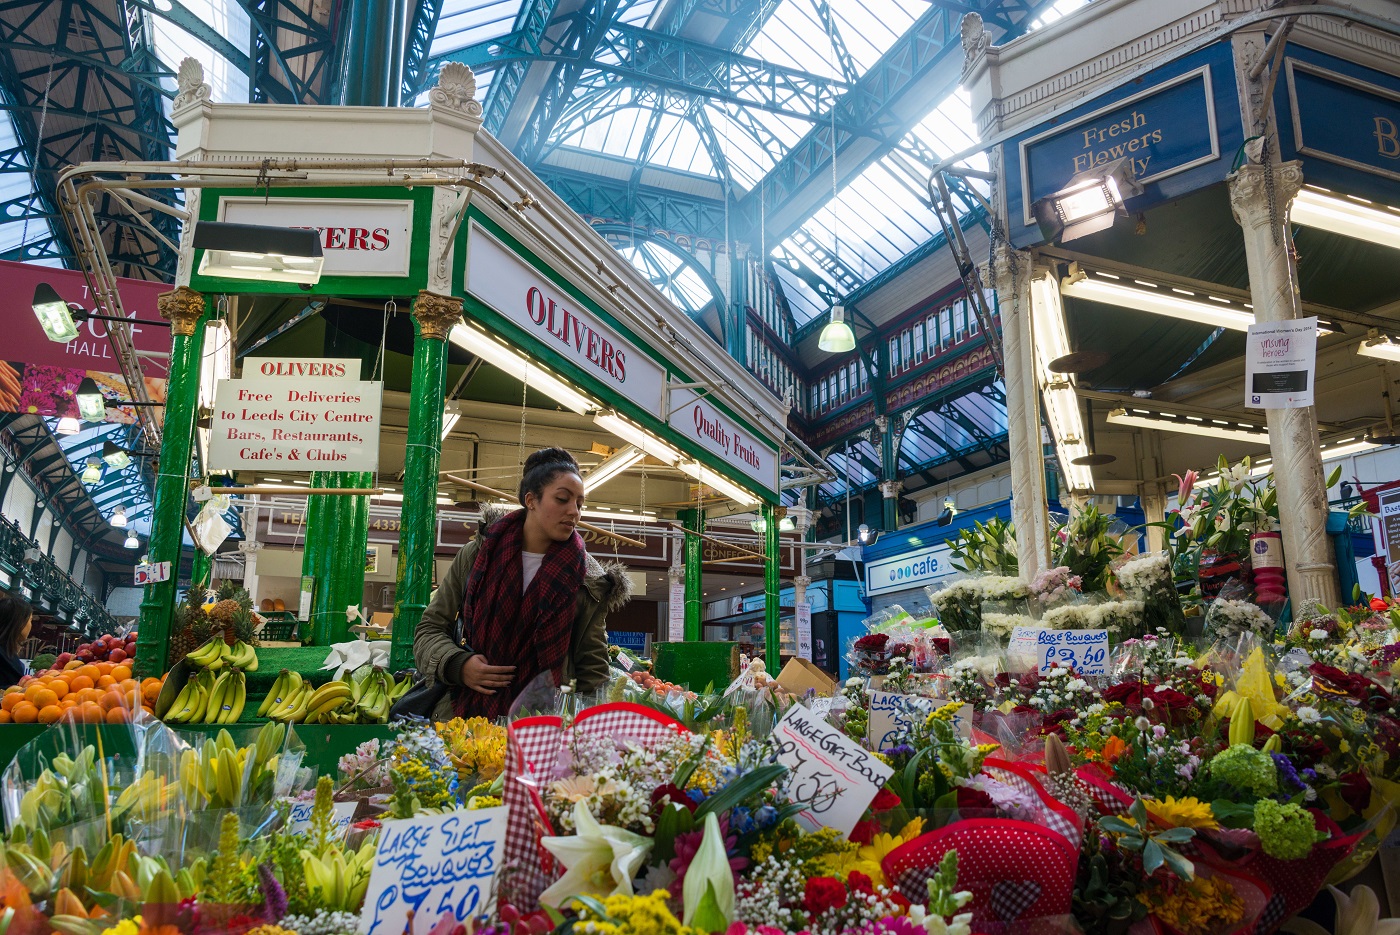 Flower stall in Leeds City Market, © Diana Jarvis